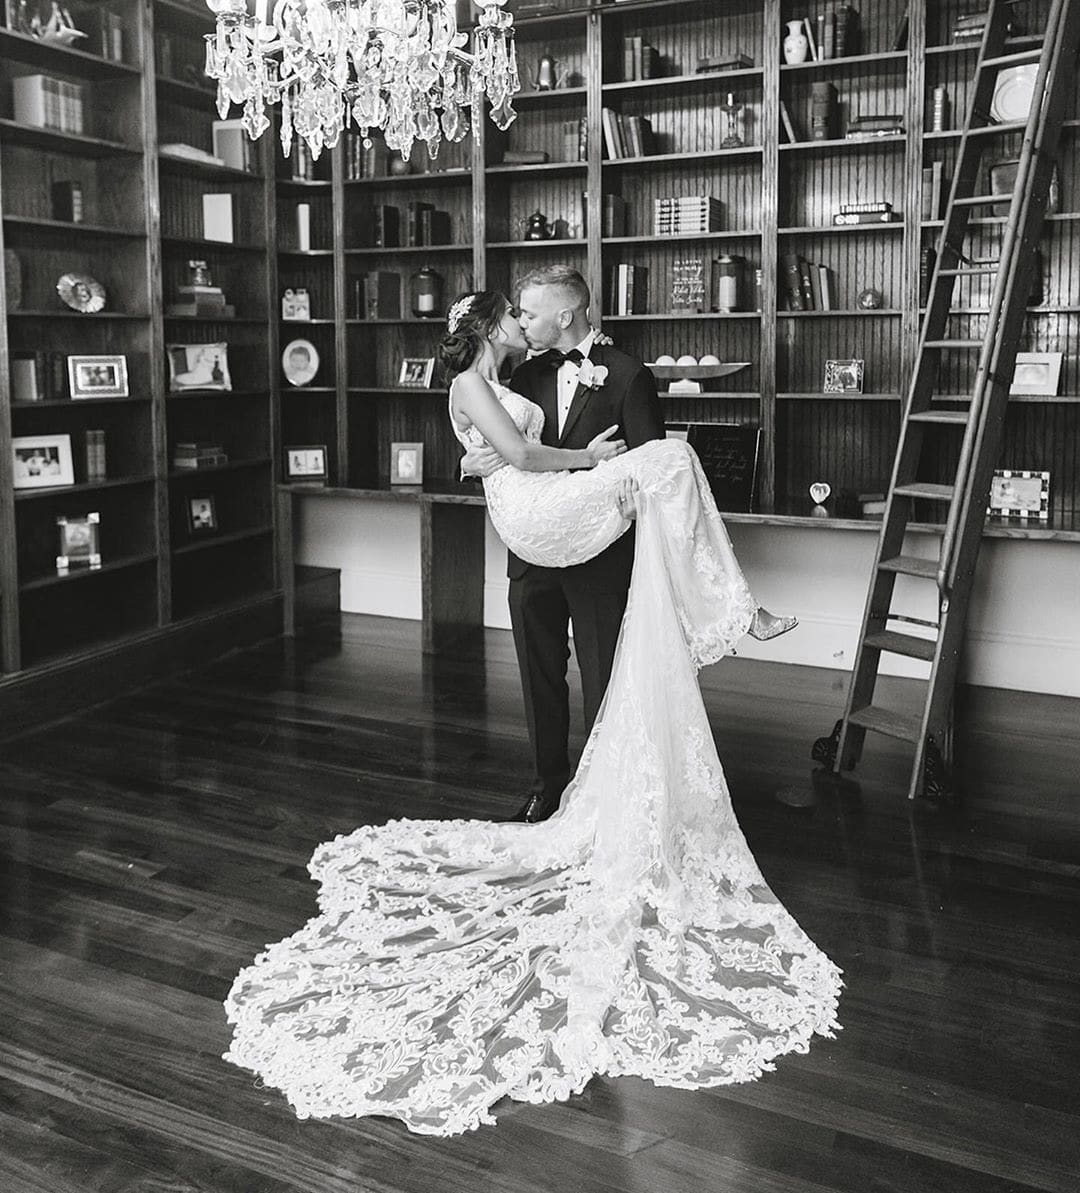 Groom holding bride with train on floor kissing in library